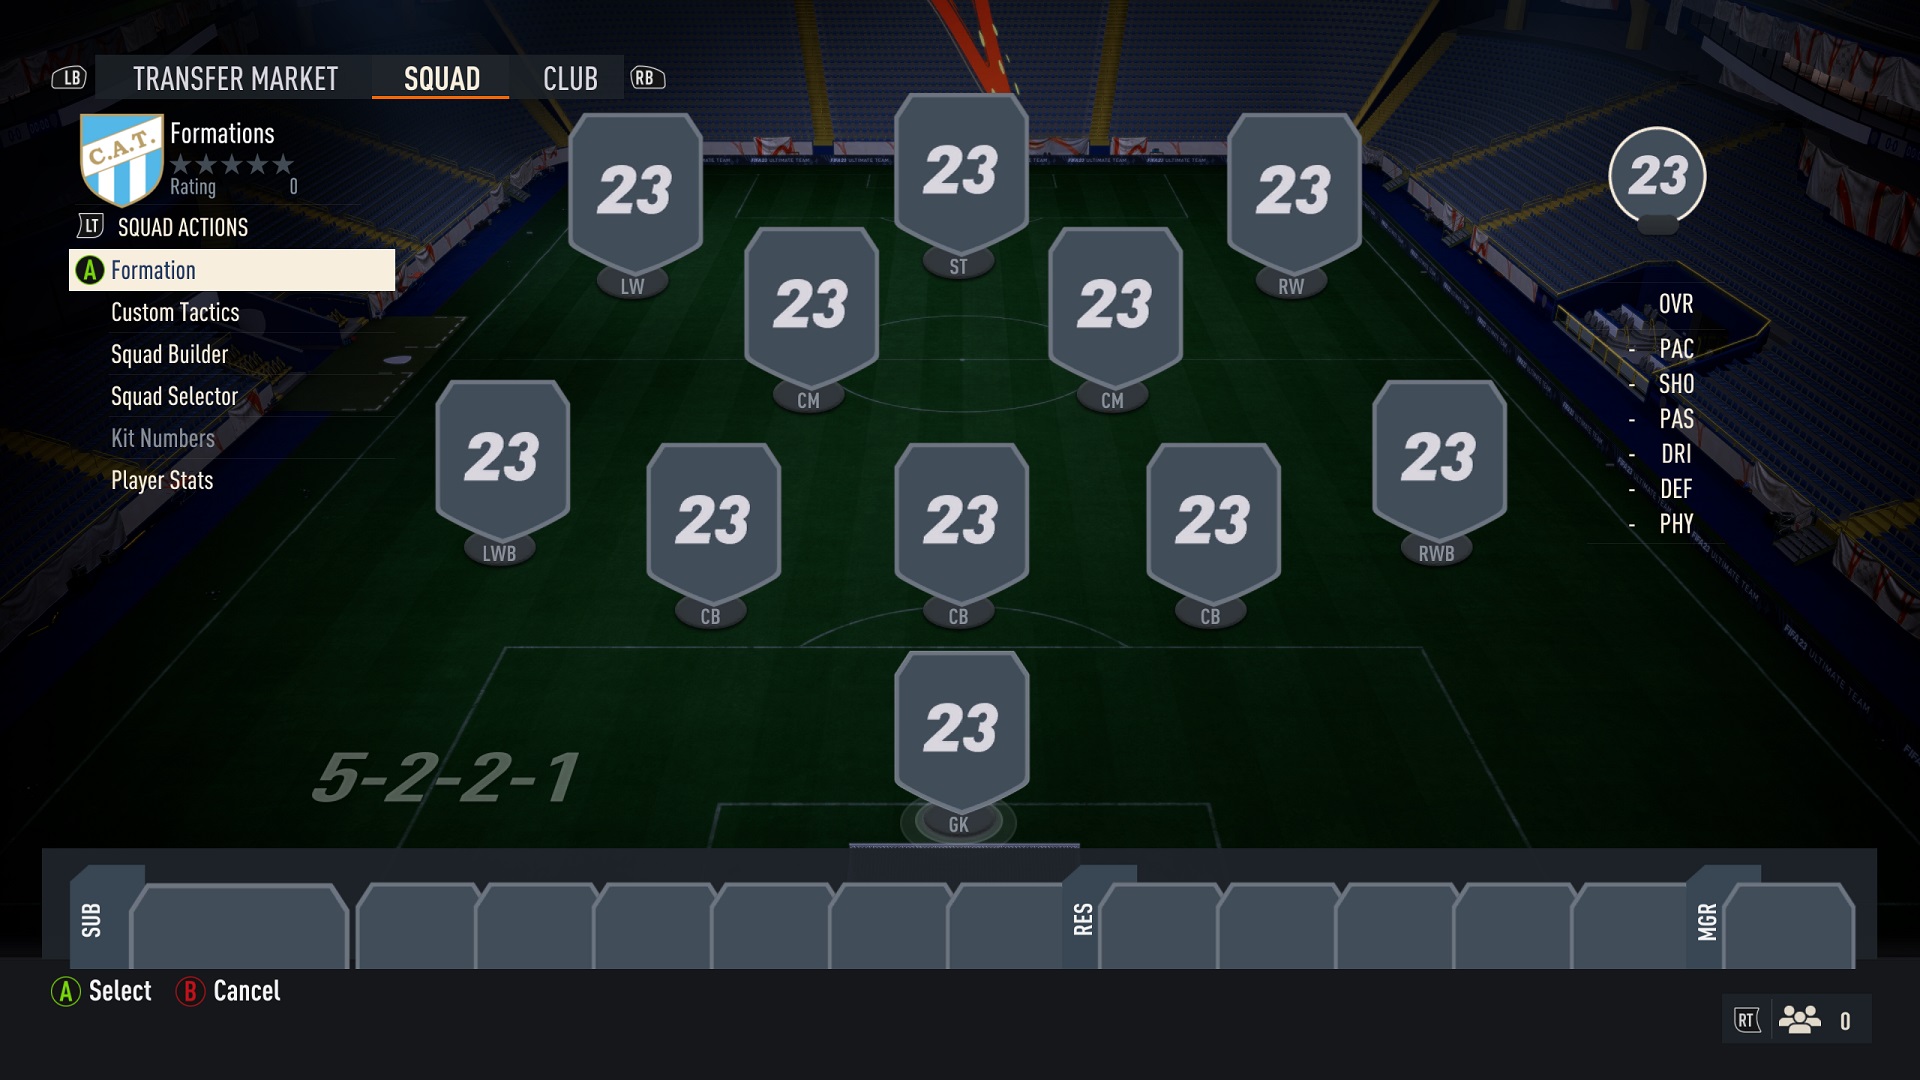 Best FIFA 22 Formations: Top 5 Ways to Set Up Your Team - KeenGamer